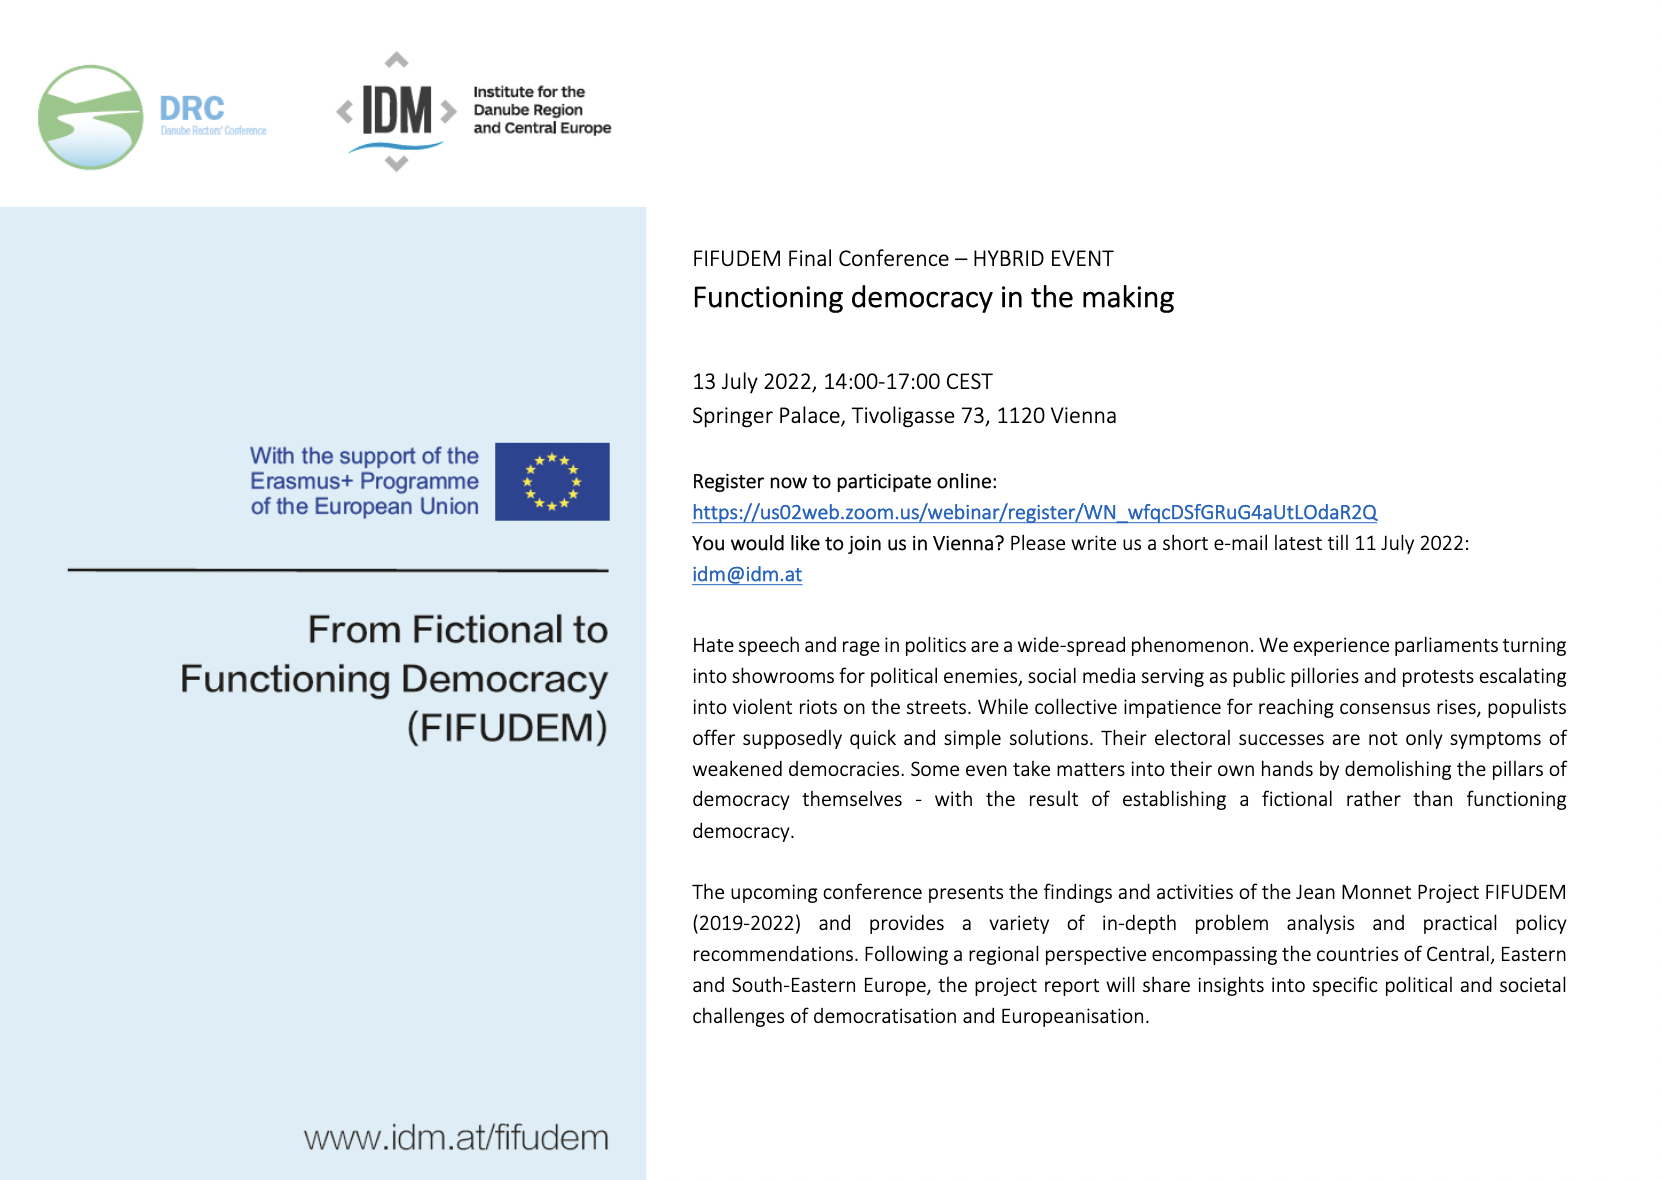 FIFUDEM Final Conference: "Functioning democracy in the making"